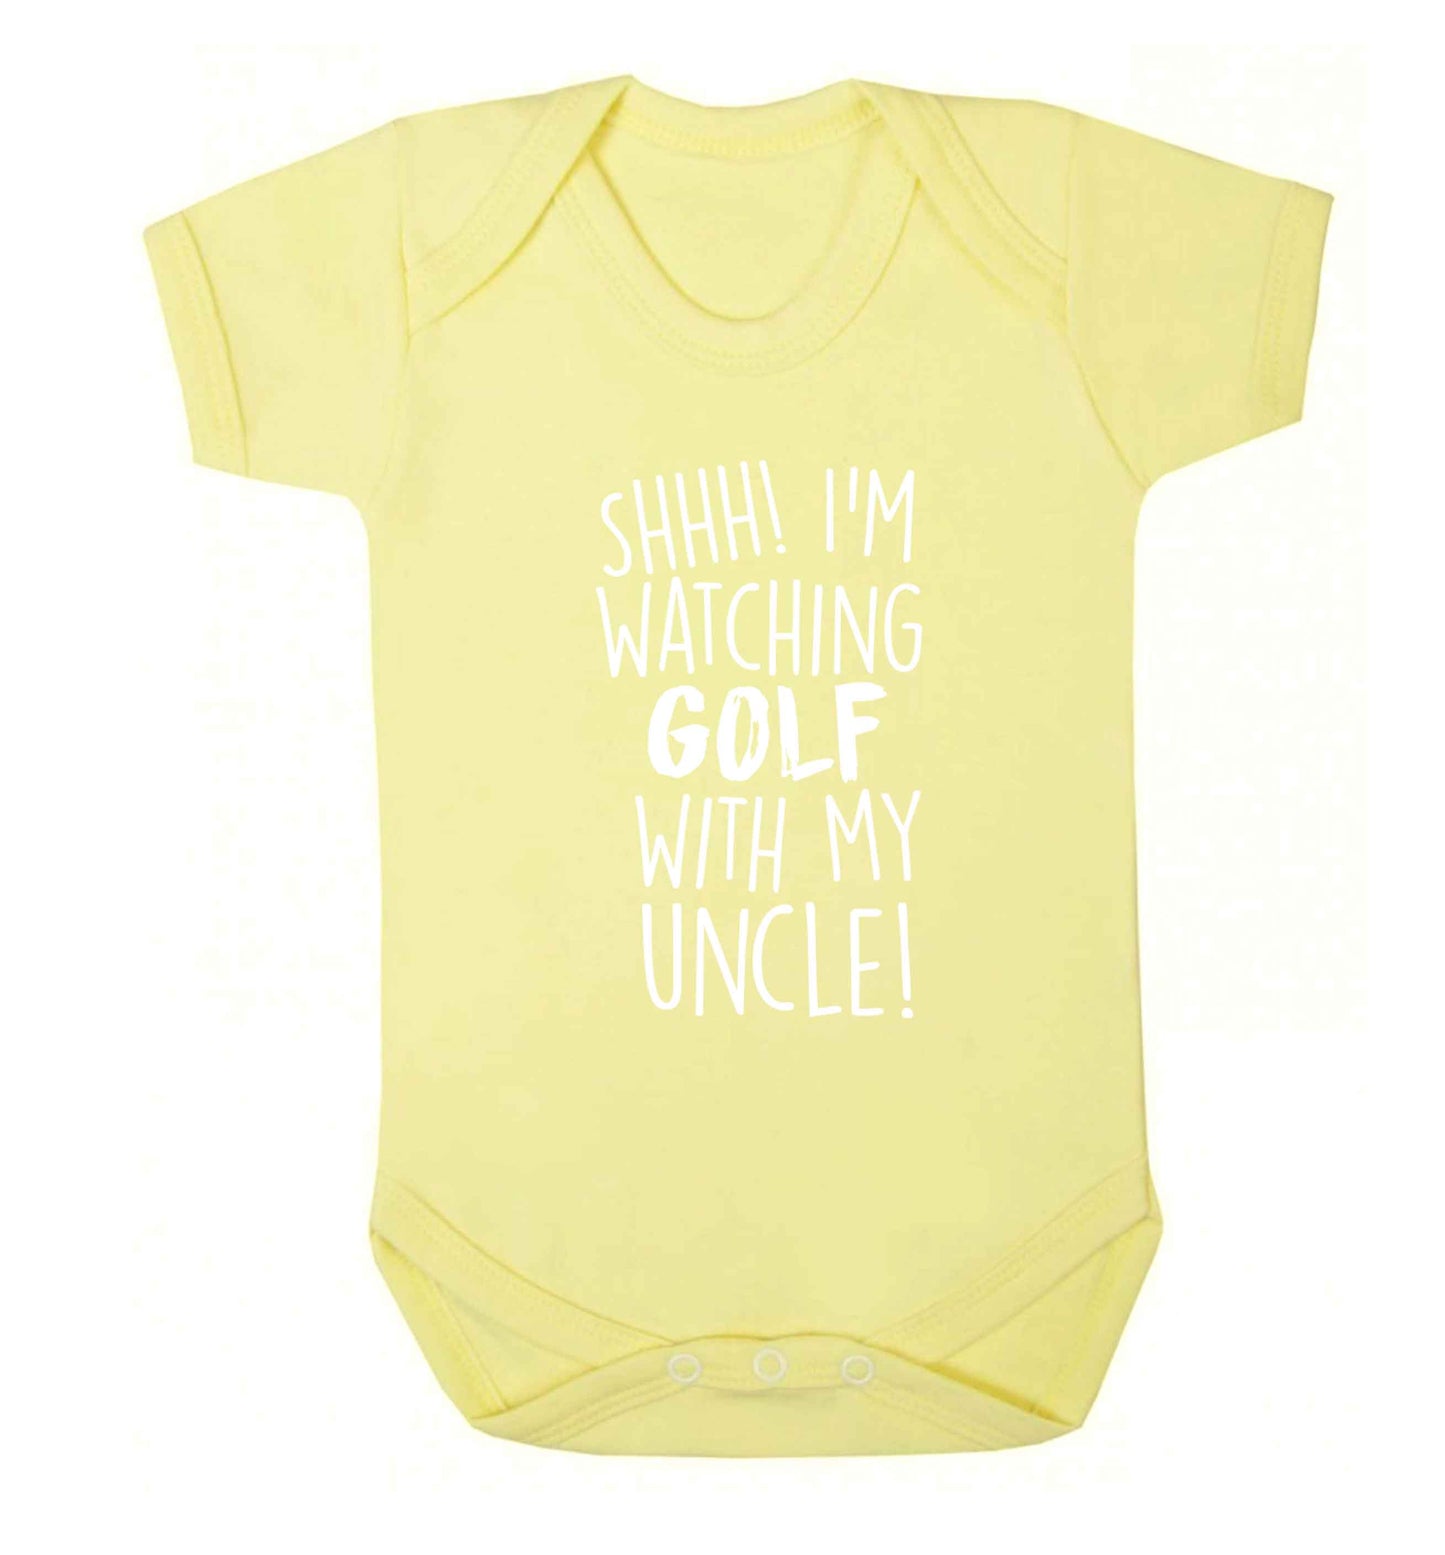 Shh I'm watching golf with my uncle Baby Vest pale yellow 18-24 months